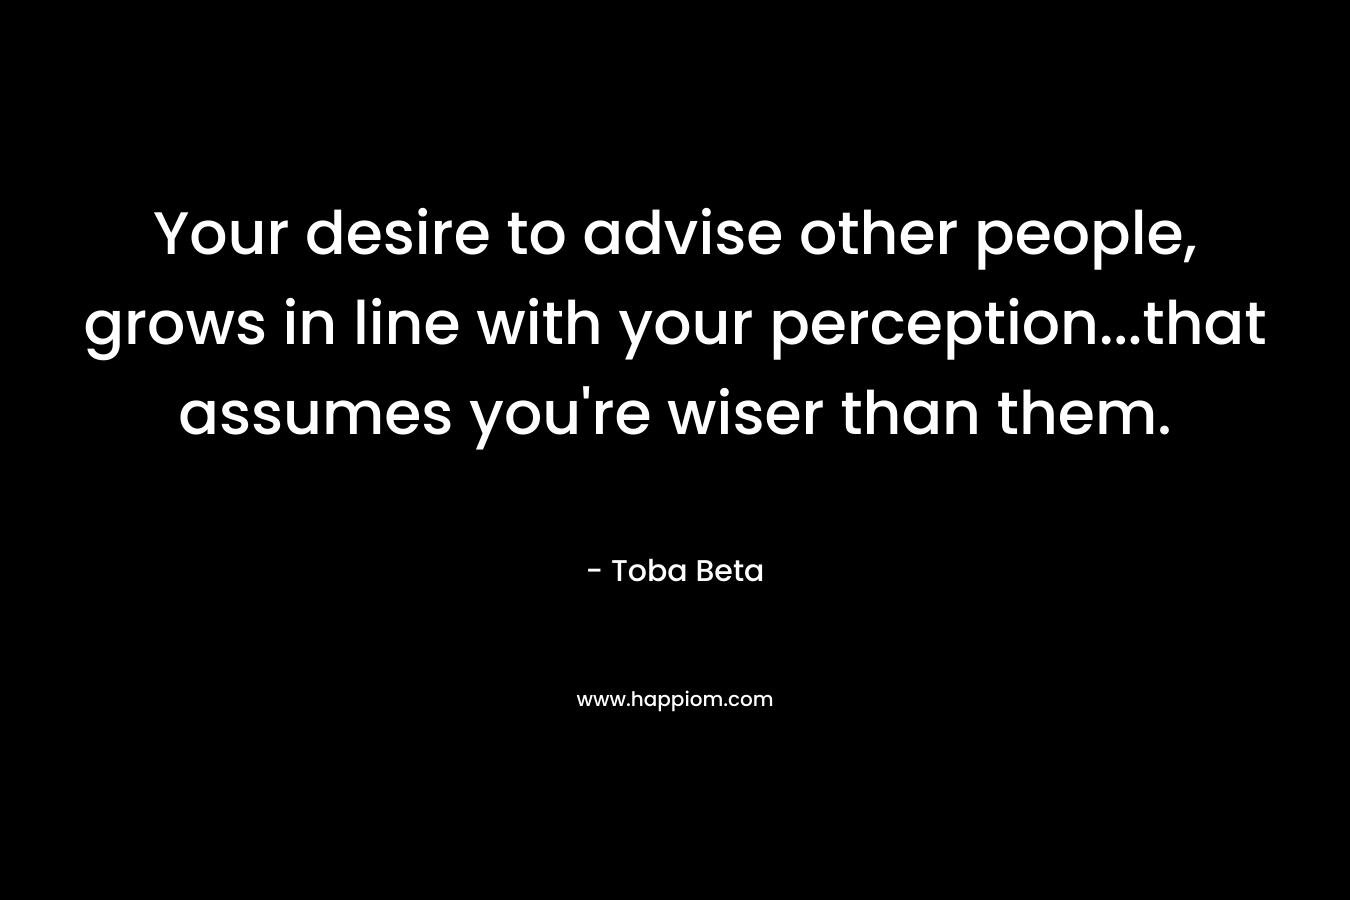 Your desire to advise other people, grows in line with your perception…that assumes you’re wiser than them. – Toba Beta